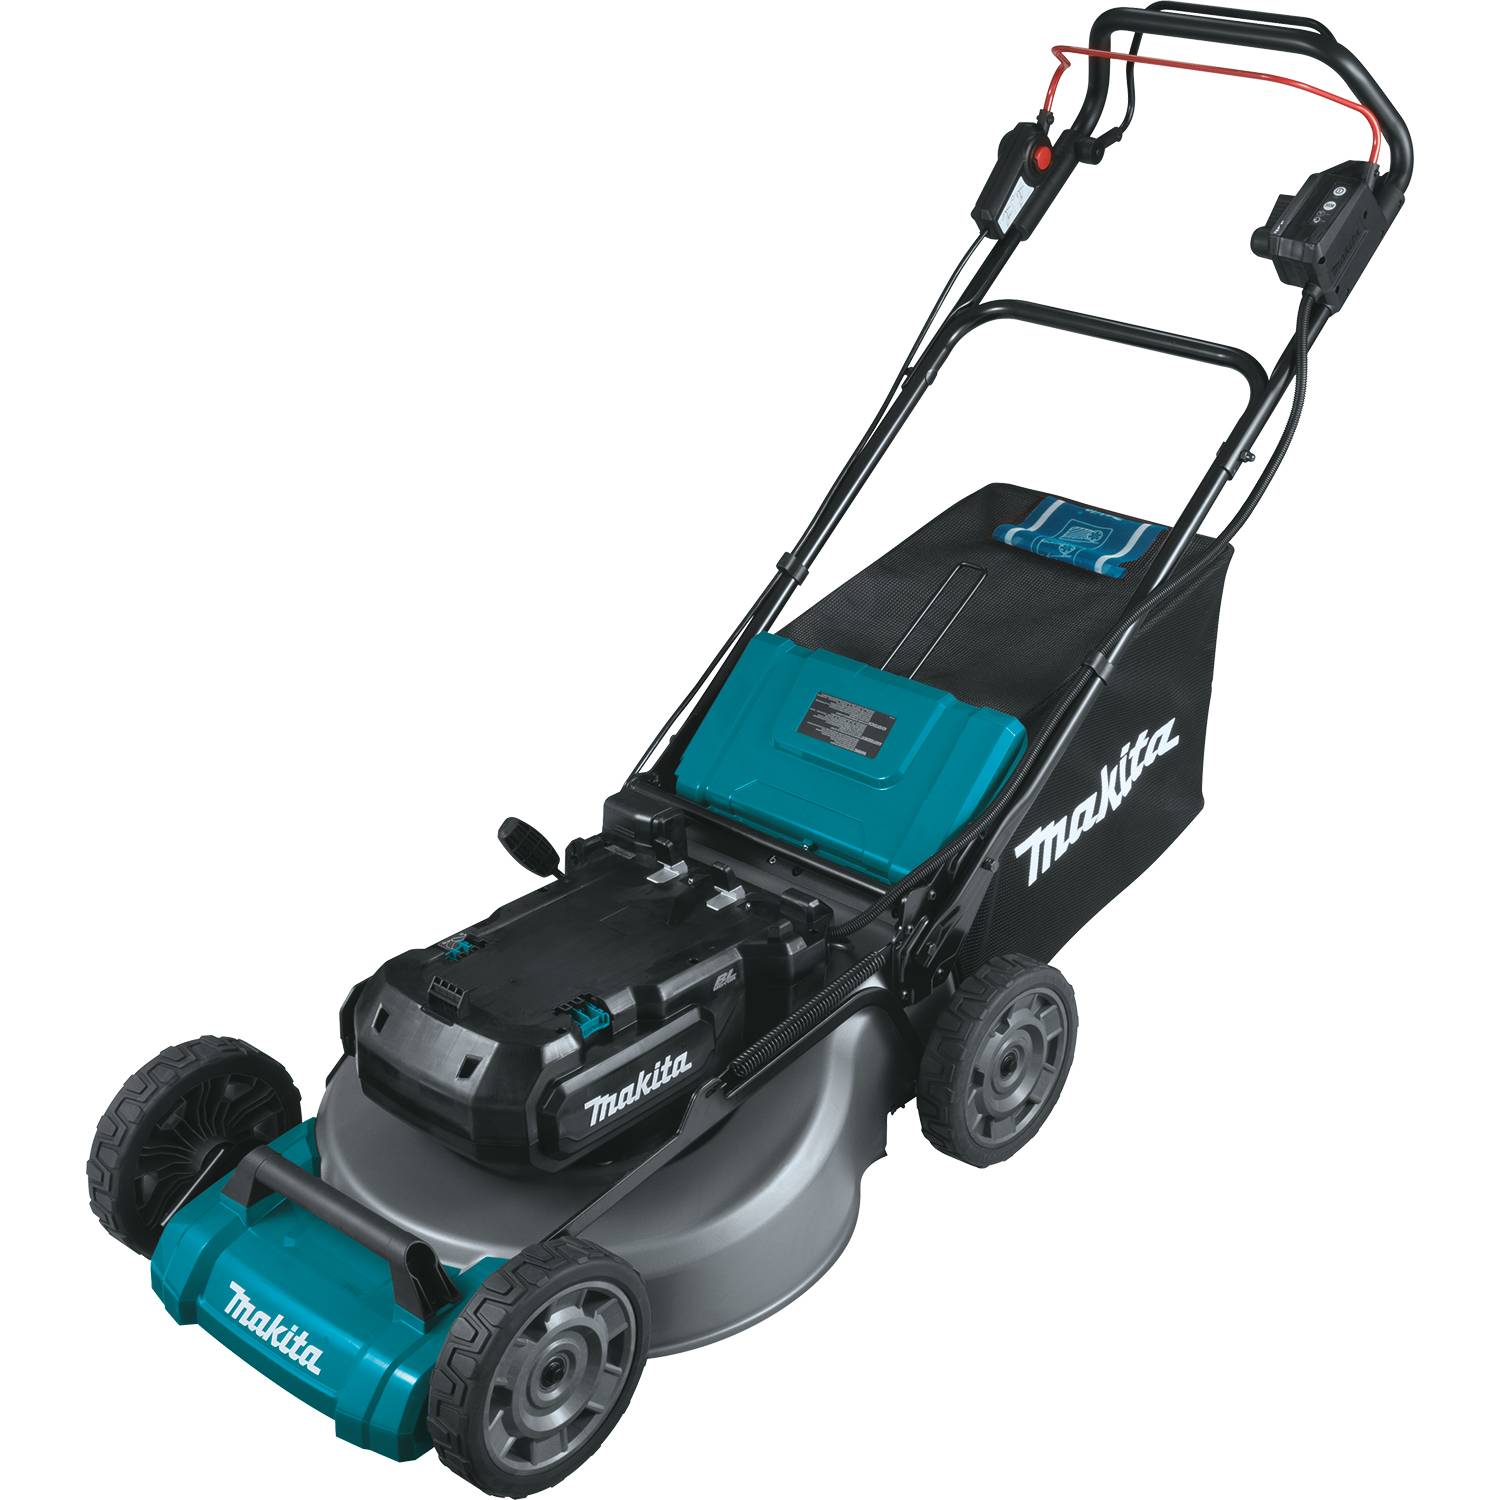 Makita CML01Z 36V ConnectX Brushless 21 Self Propelled Commercial Lawn Mower, Tool Only